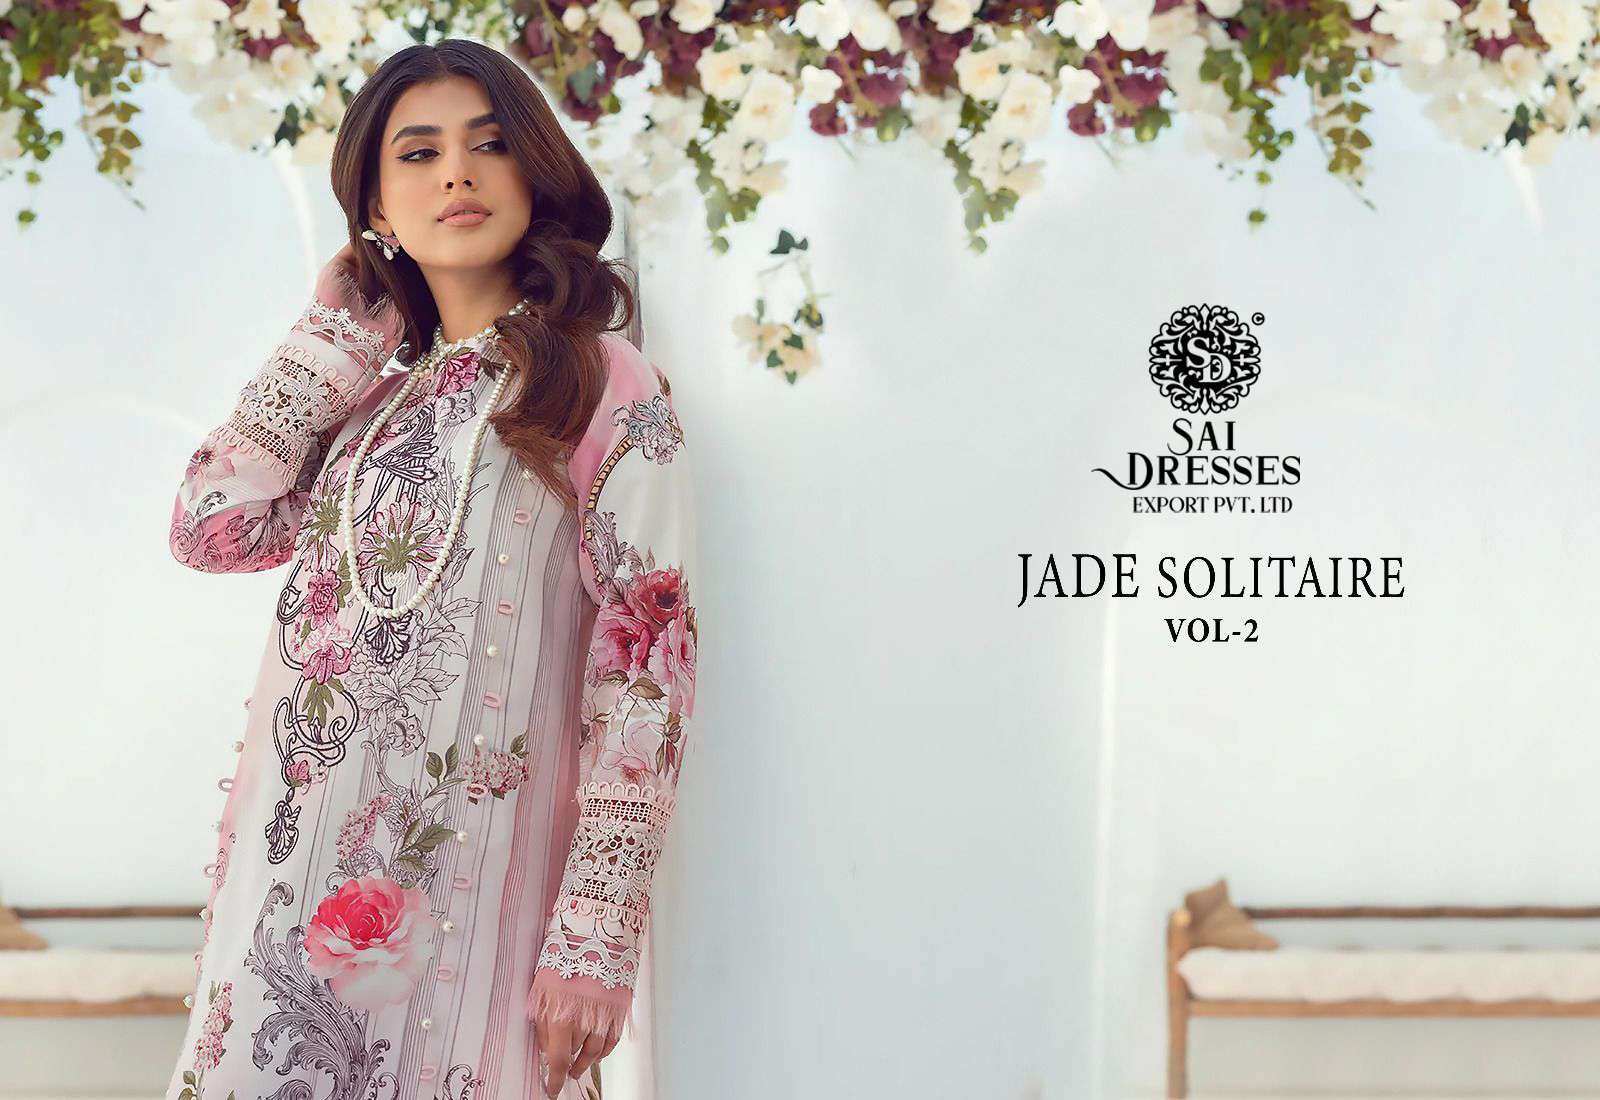 SAI DRESSES PRESENT JADE SOLITAIRE VOL 2 PURE COTTON PATCH EMBROIDERED PAKISTANI SALWAR SUITS IN WHOLESALE RATE IN SURAT